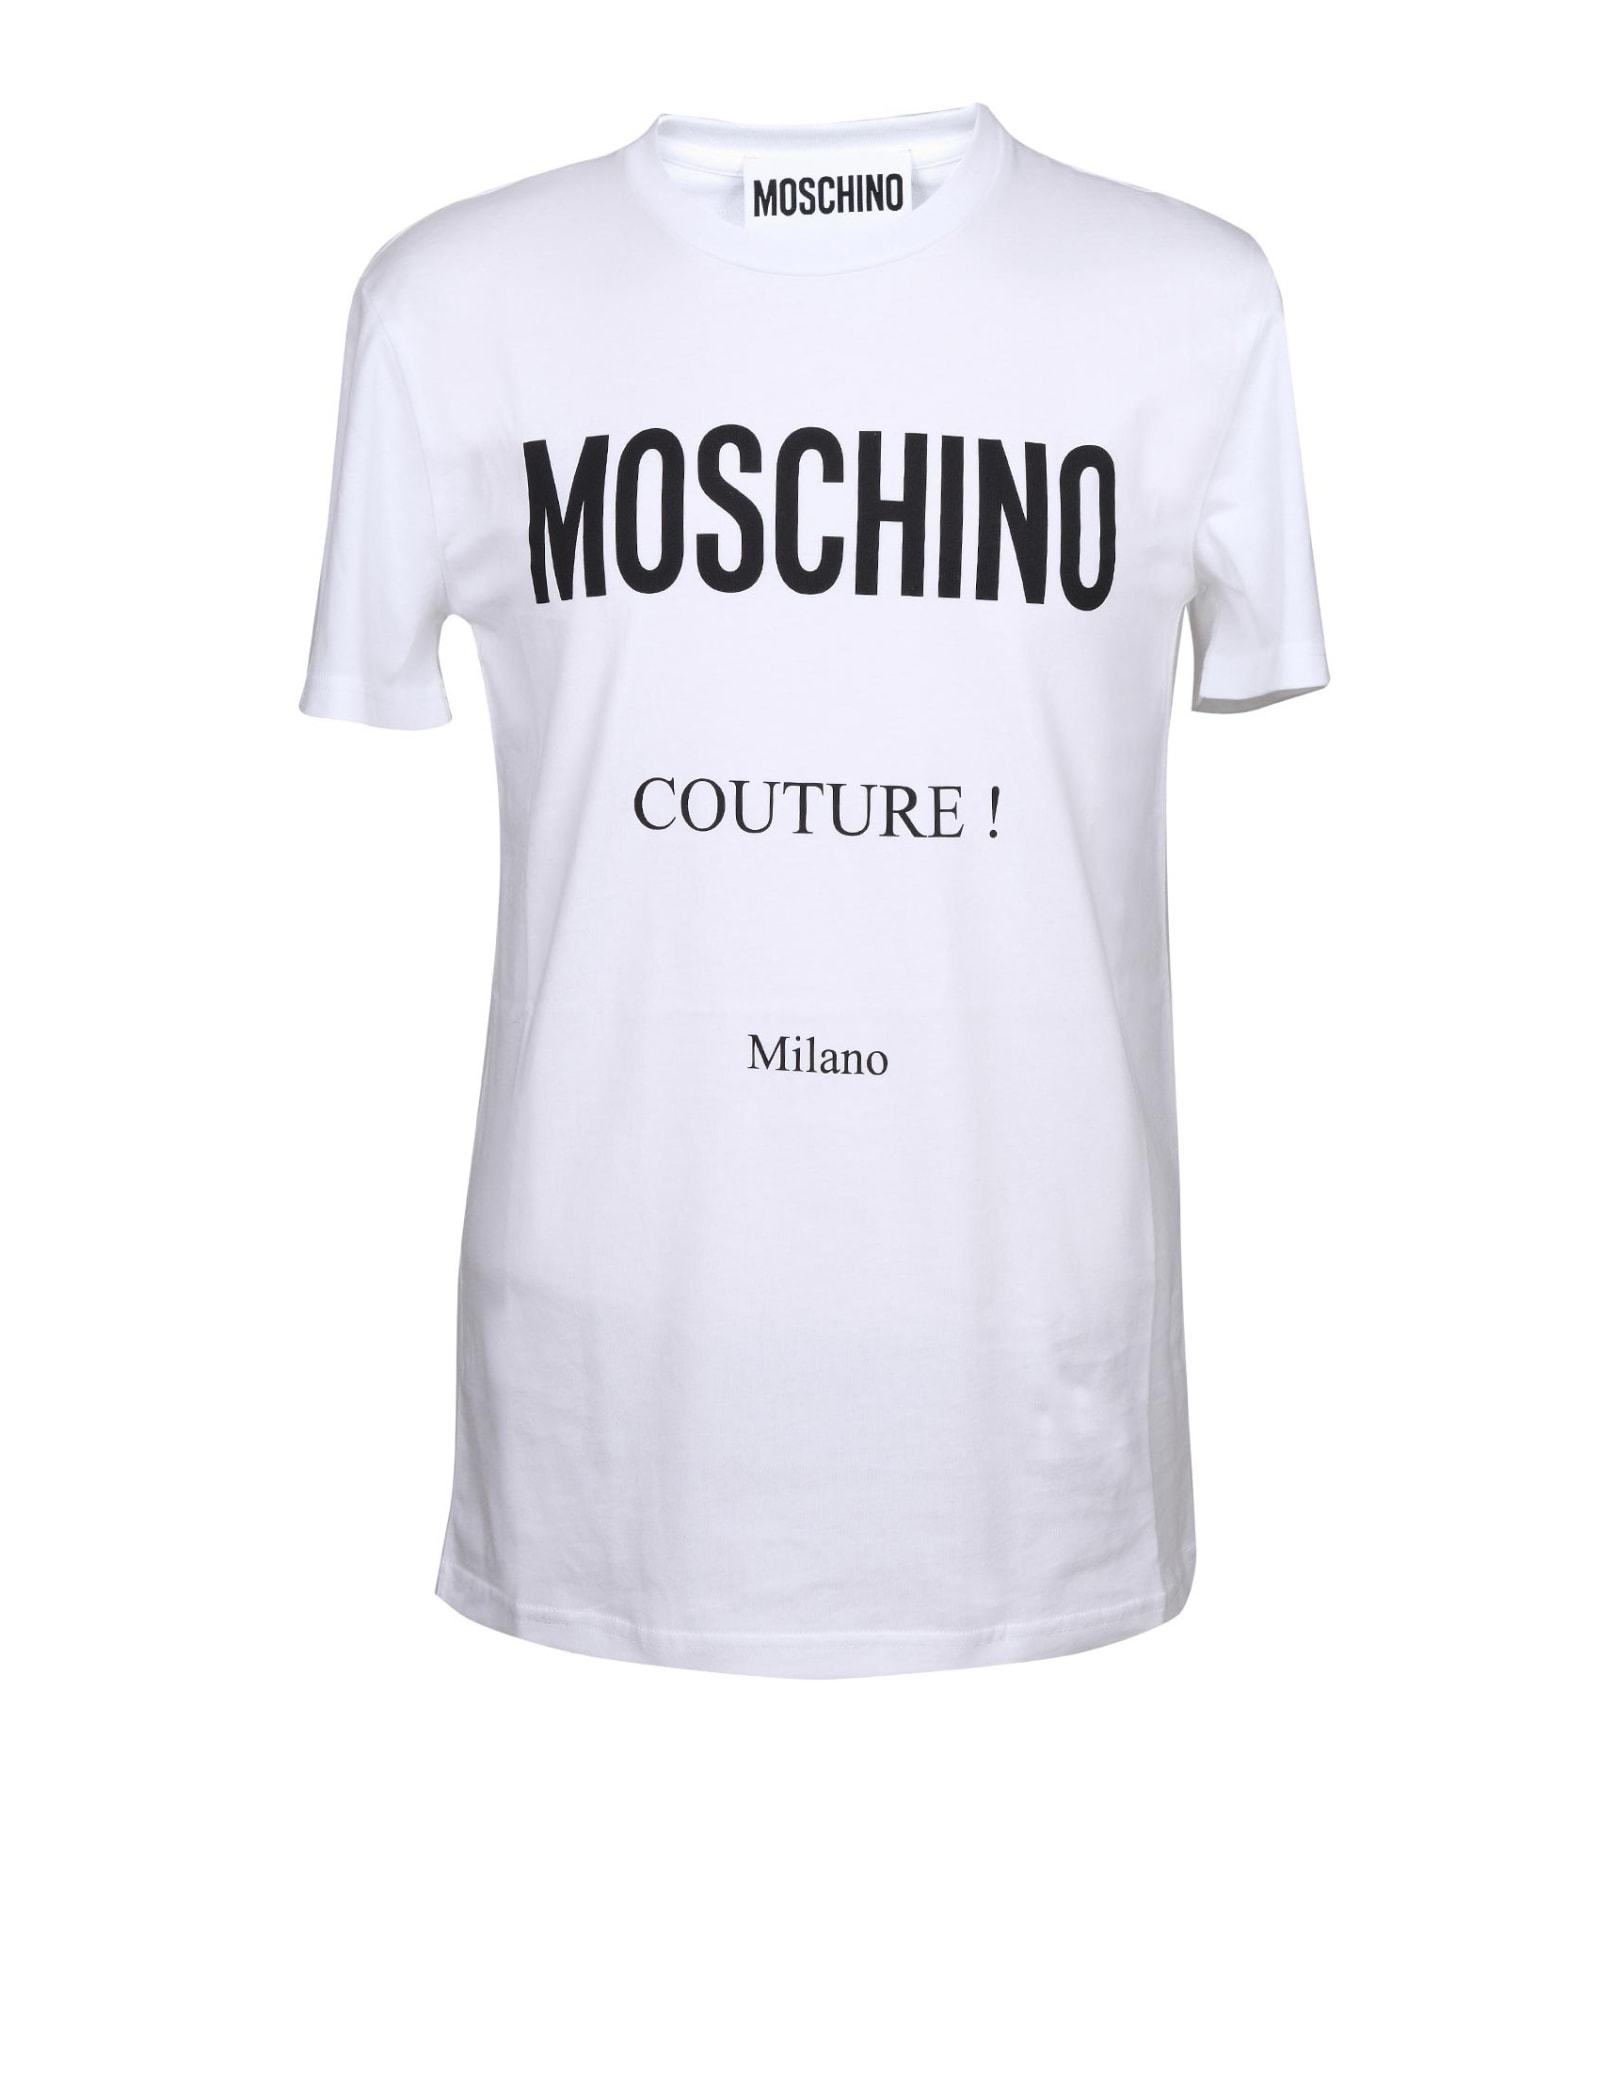 MOSCHINO T-SHIRT COUTURE MILAN IN JERSEY,A07192040 1001